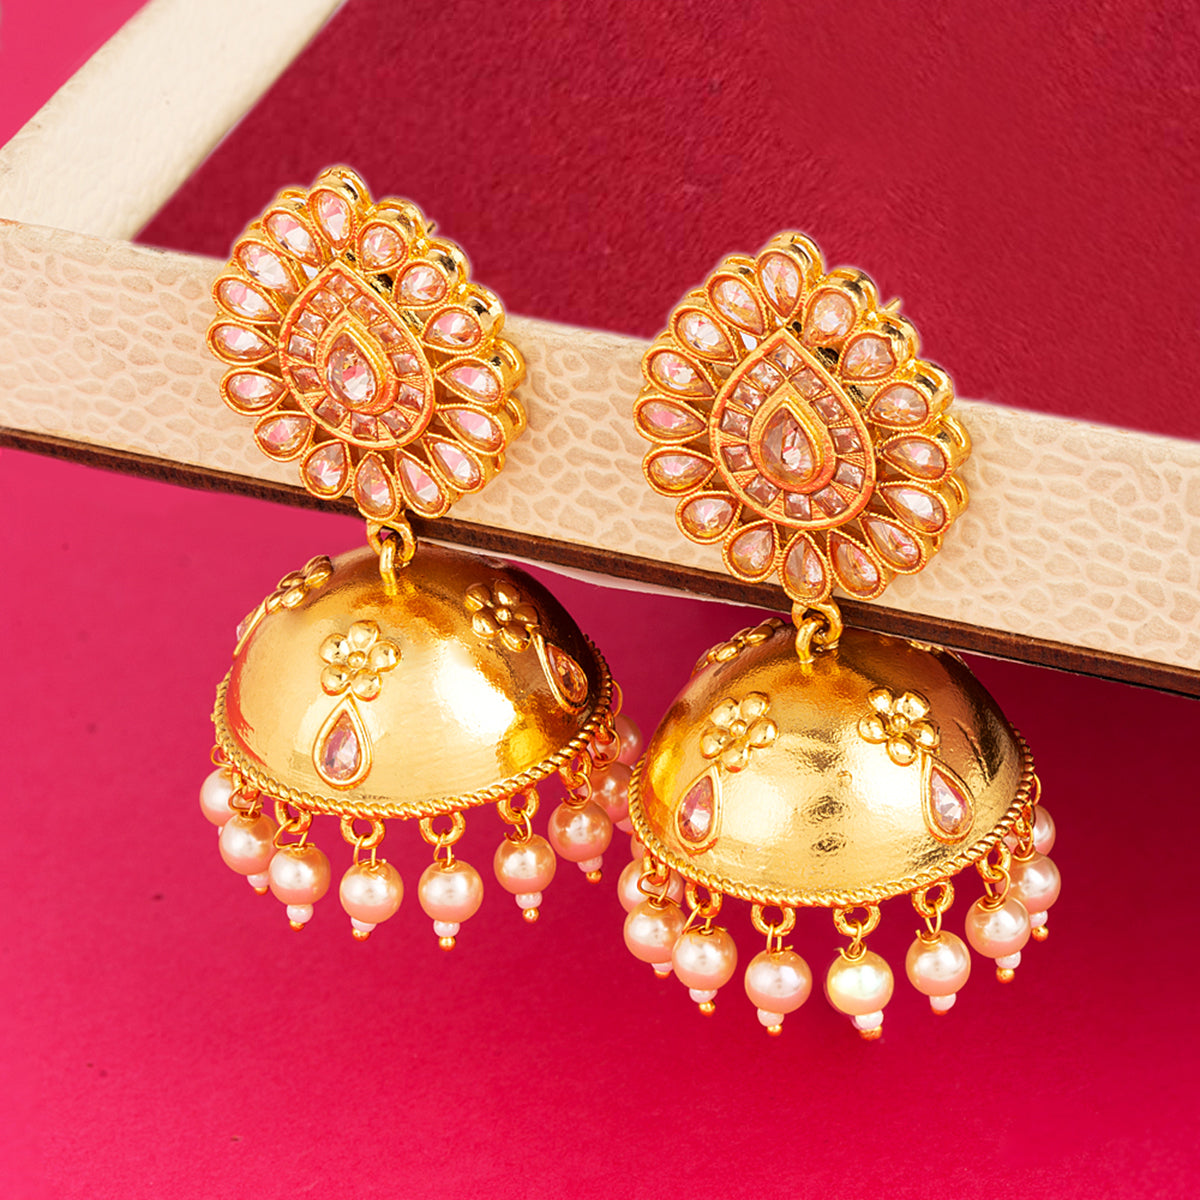 Buy Voylla Green Stone Jhankar Gold Plated Jhumka Earrings Jewellery For  Women Online at Lowest Price Ever in India | Check Reviews & Ratings - Shop  The World